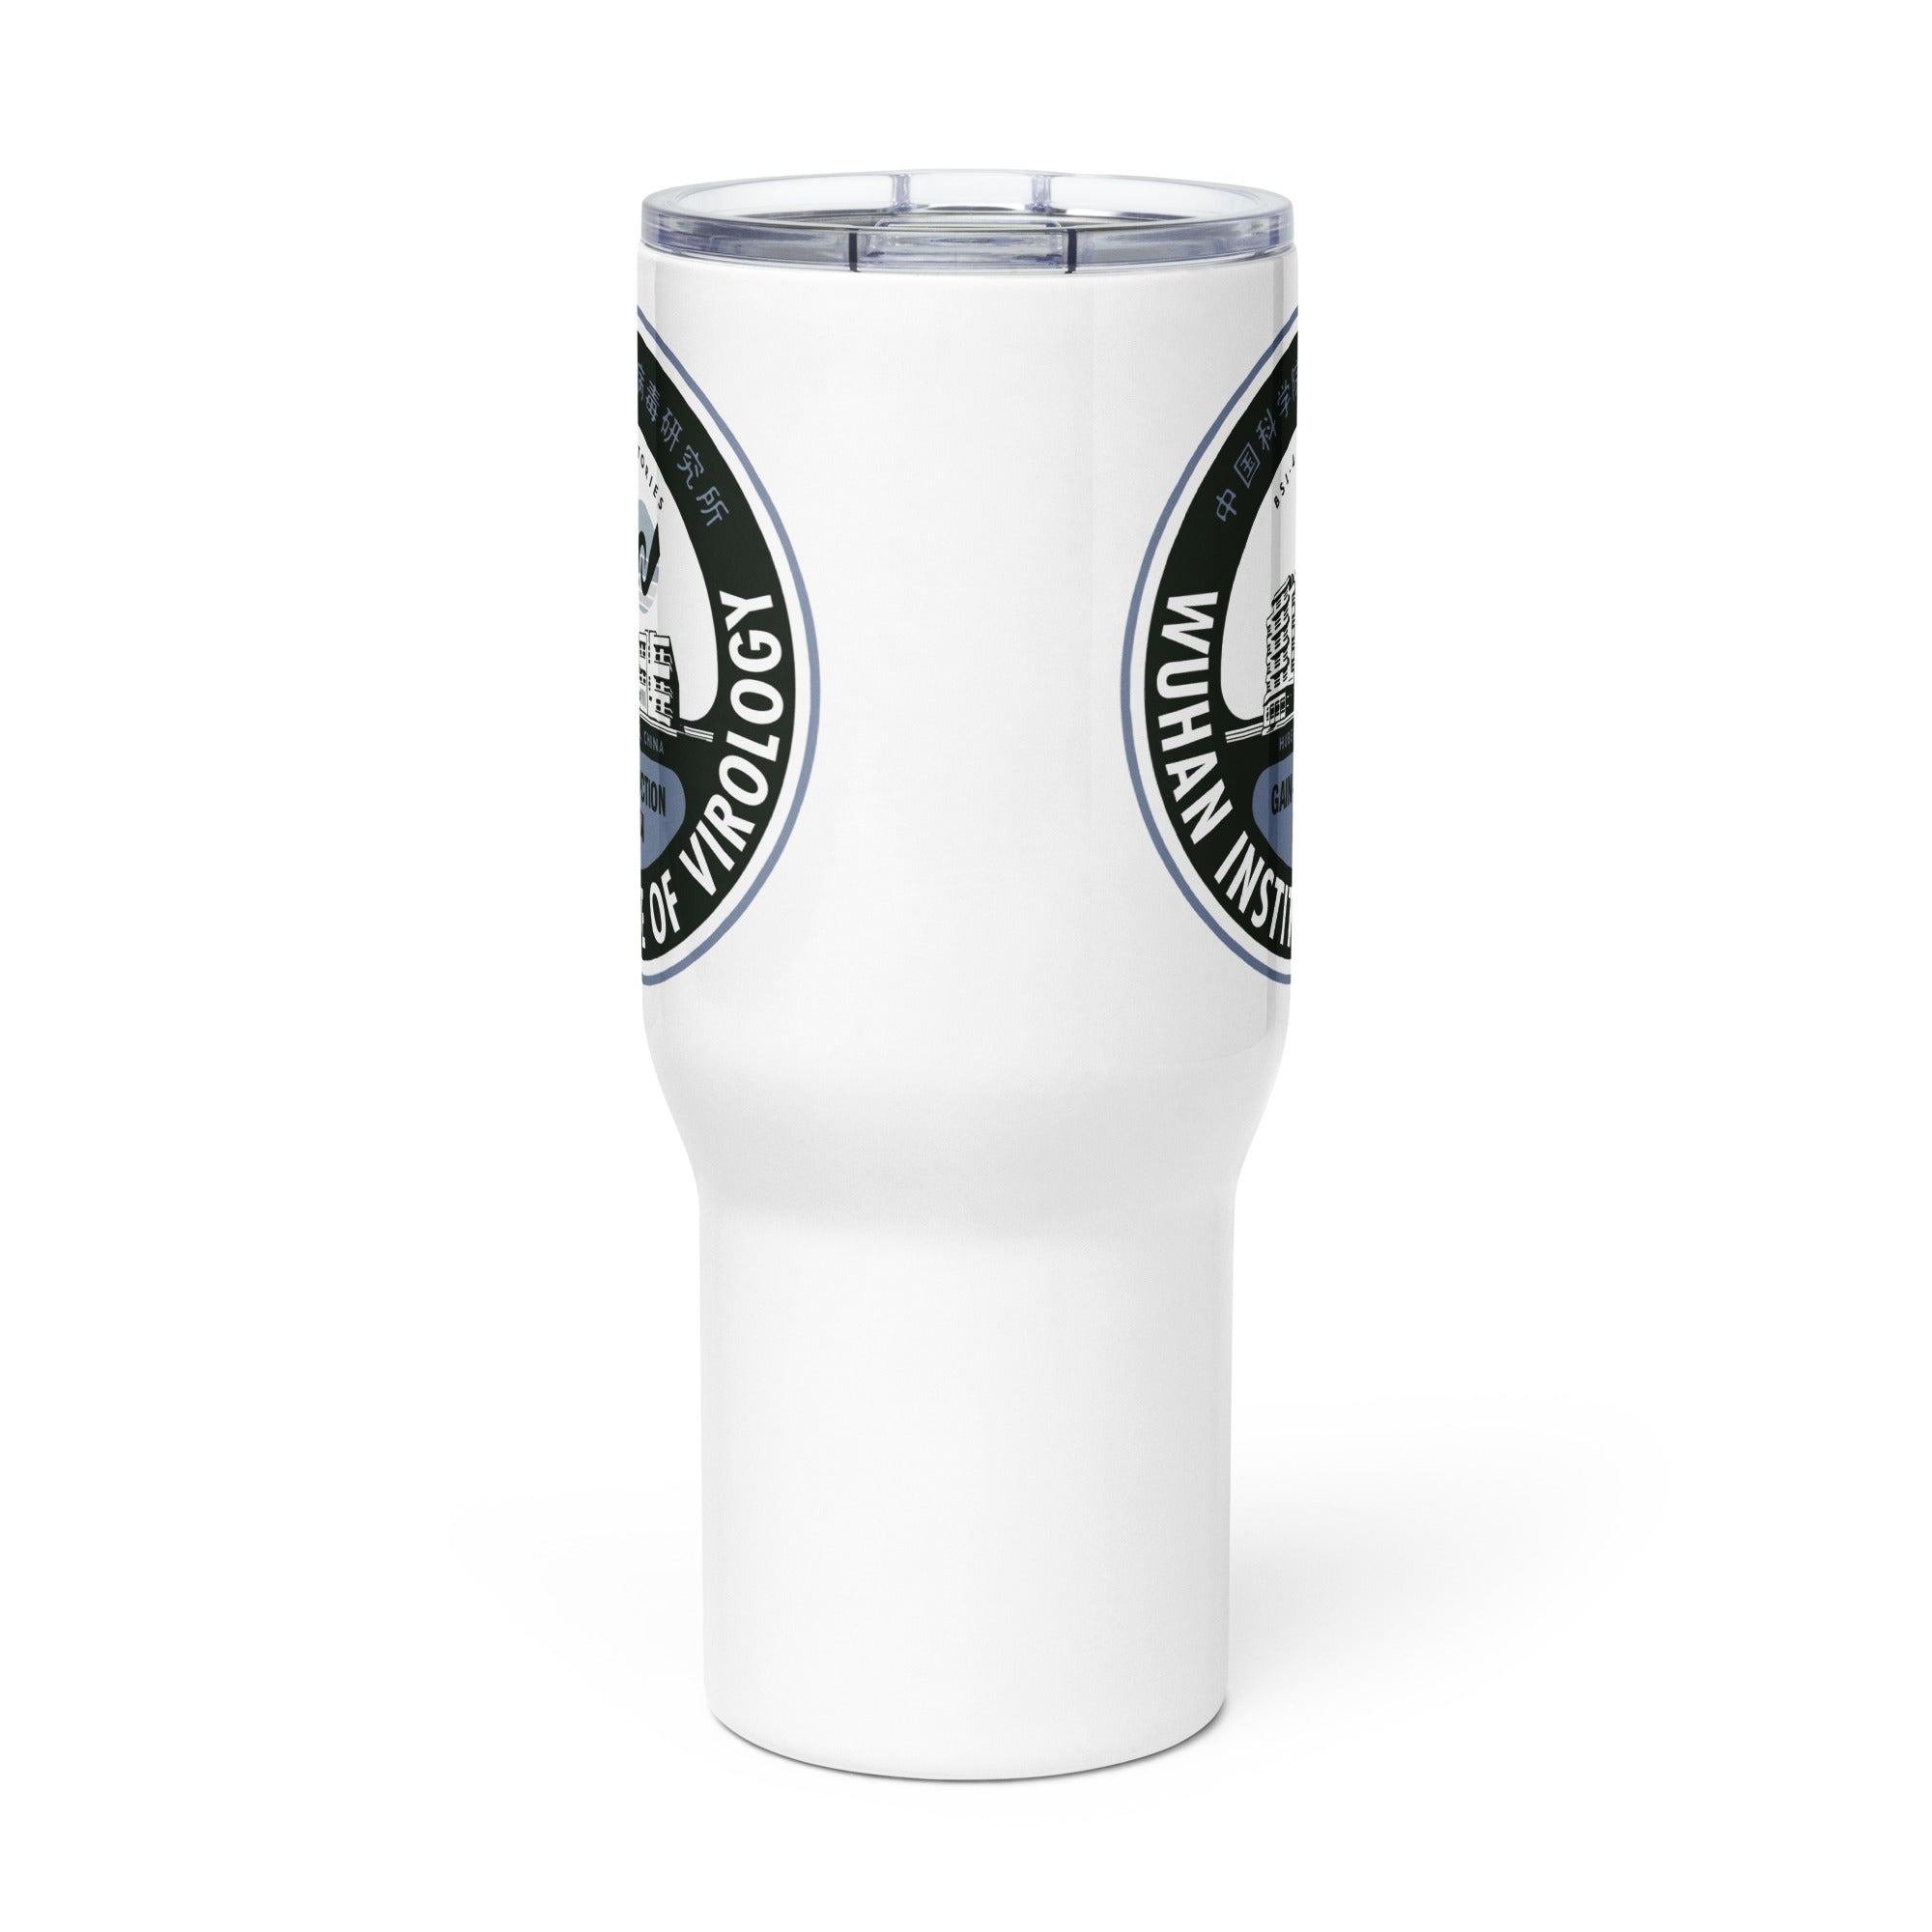 Wuhan Institute of Virology Parody Travel Mug with a Handle